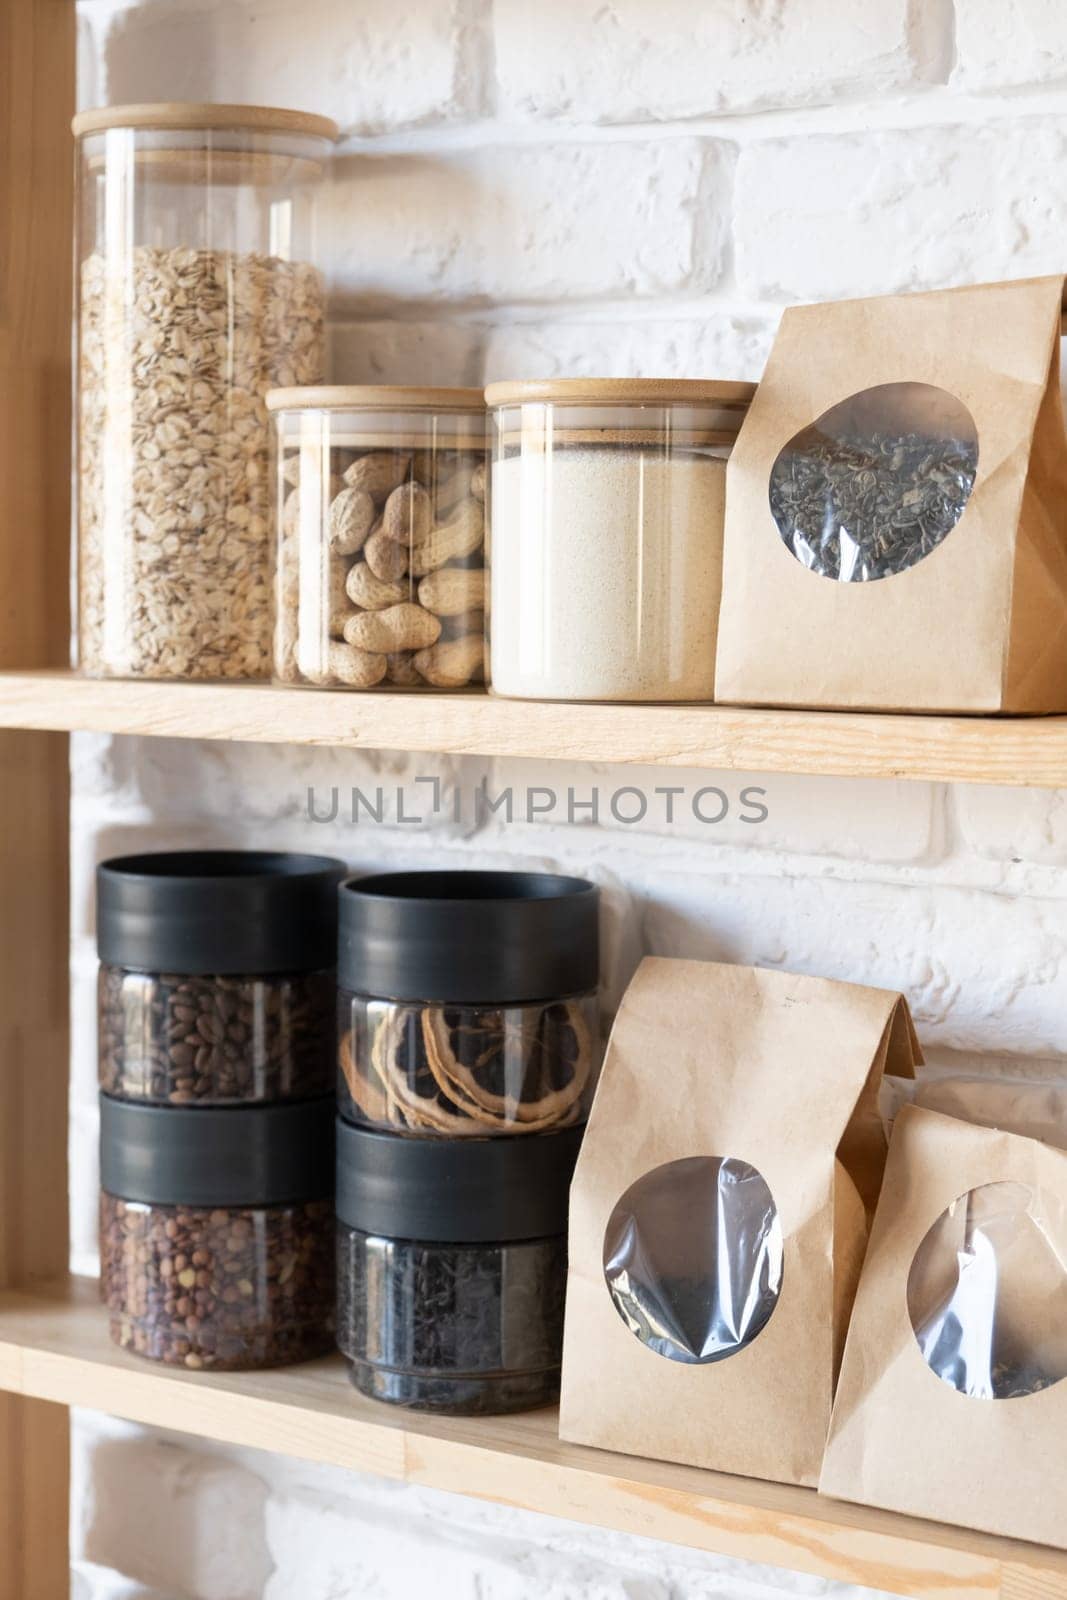 Reusing Glass Jars To Store Dried Food Living Sustainable Lifestyle At Home by Desperada